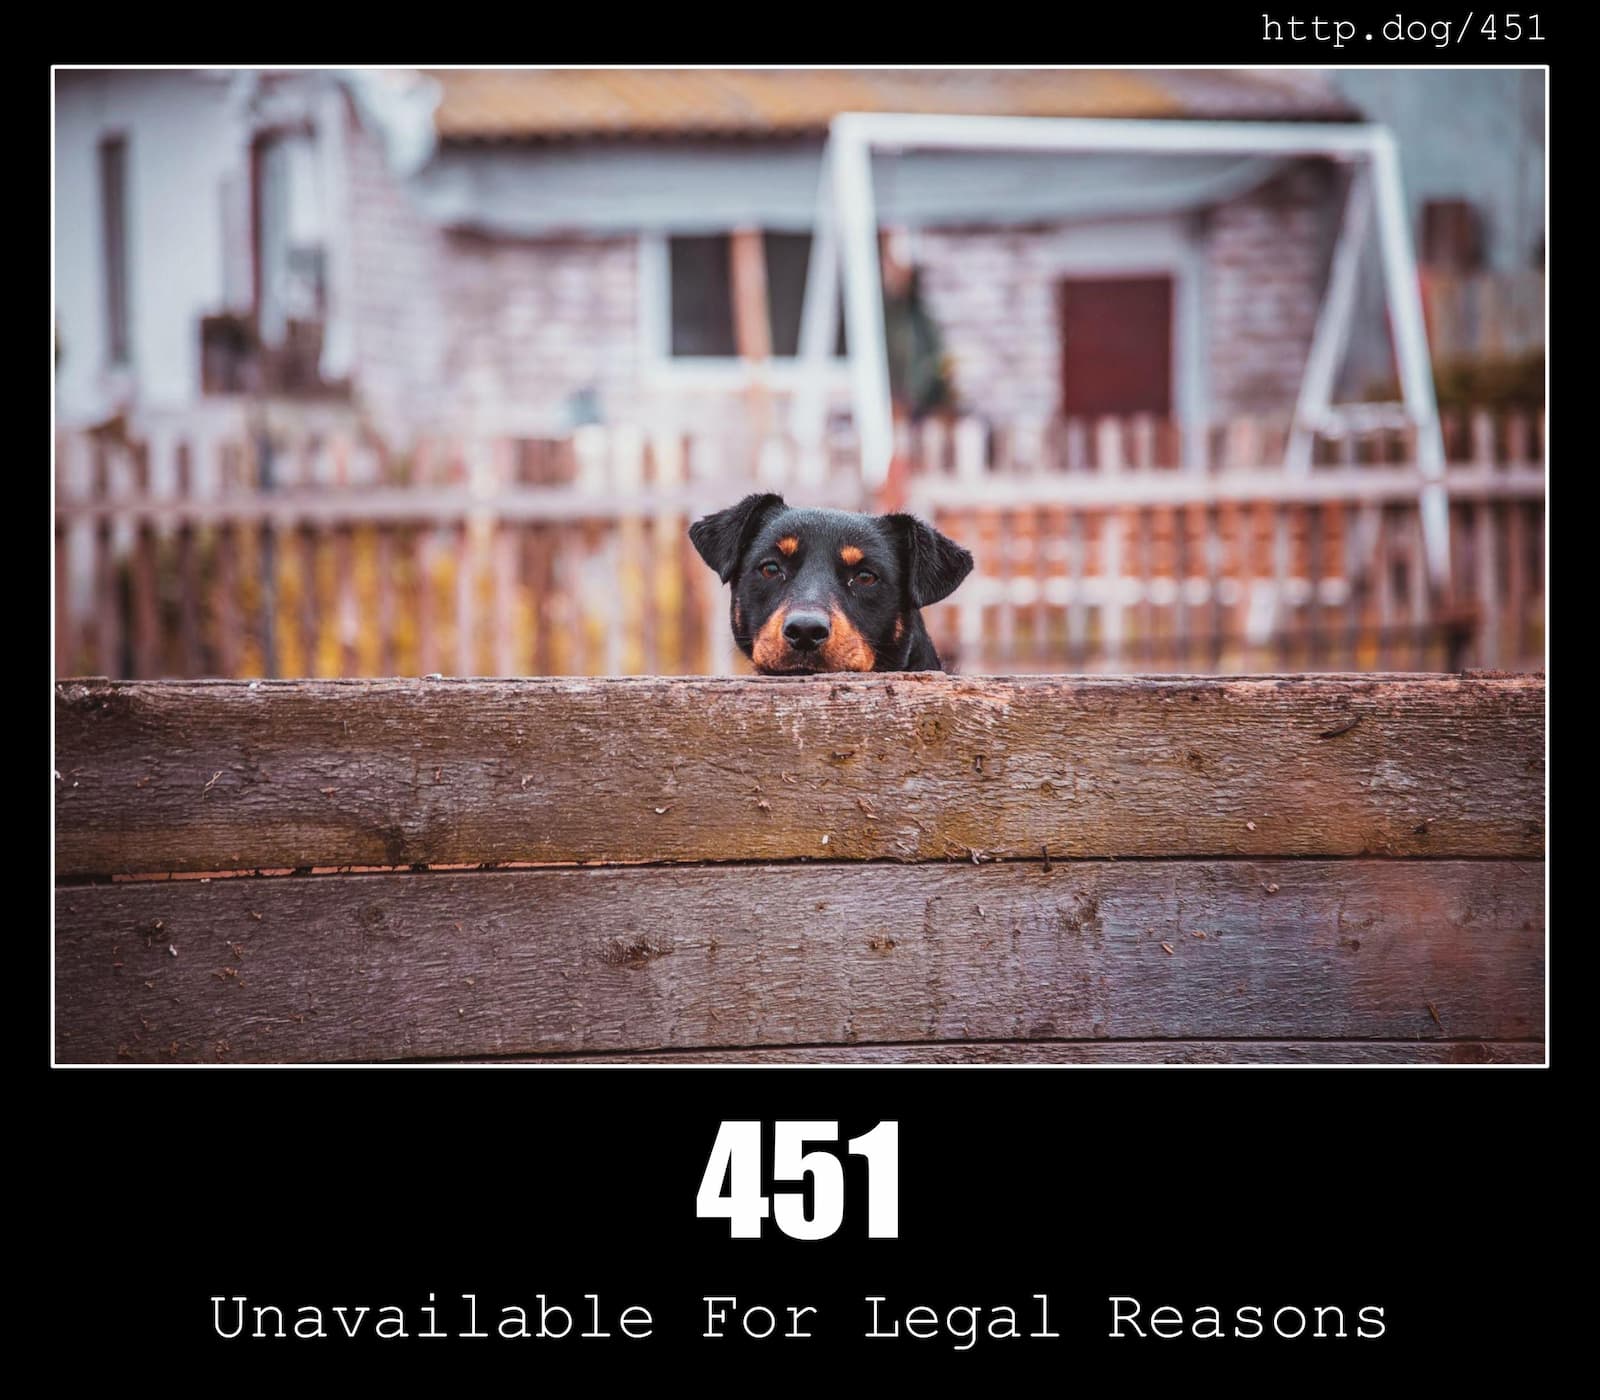 HTTP Status Code 451 Unavailable For Legal Reasons & Dogs